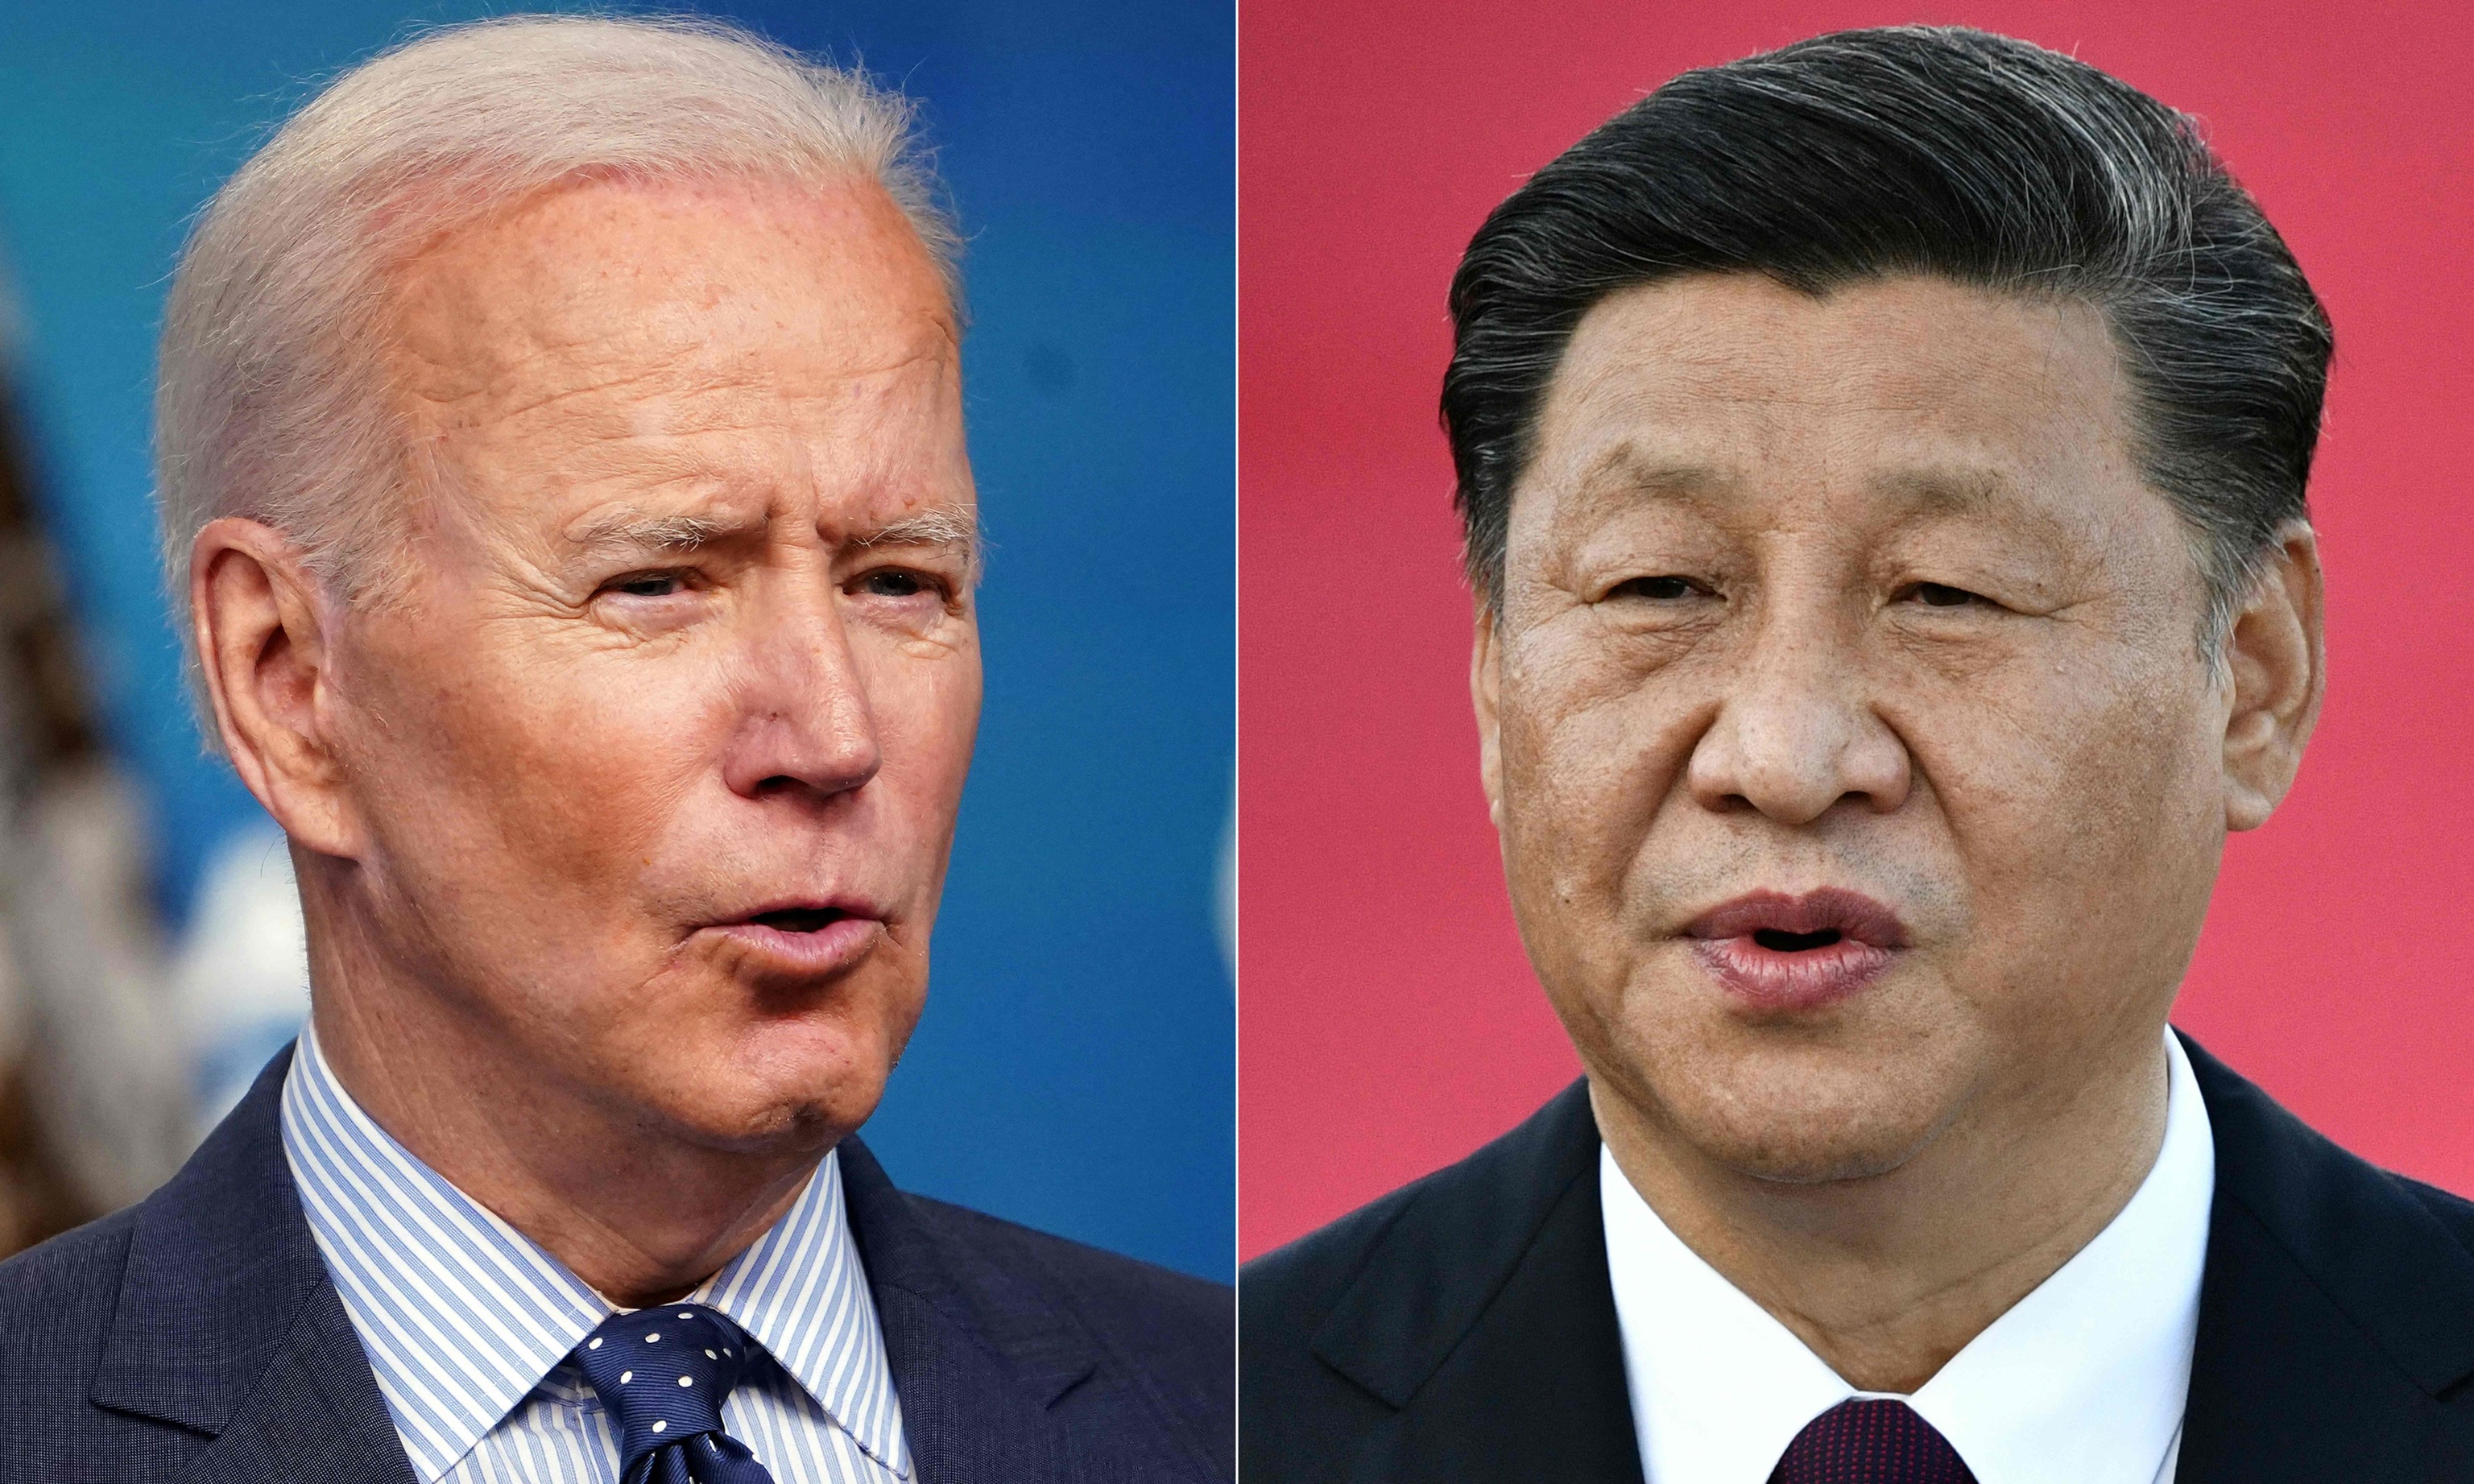 Joe Biden, president of the United States, and Xi Jinping, president of China.